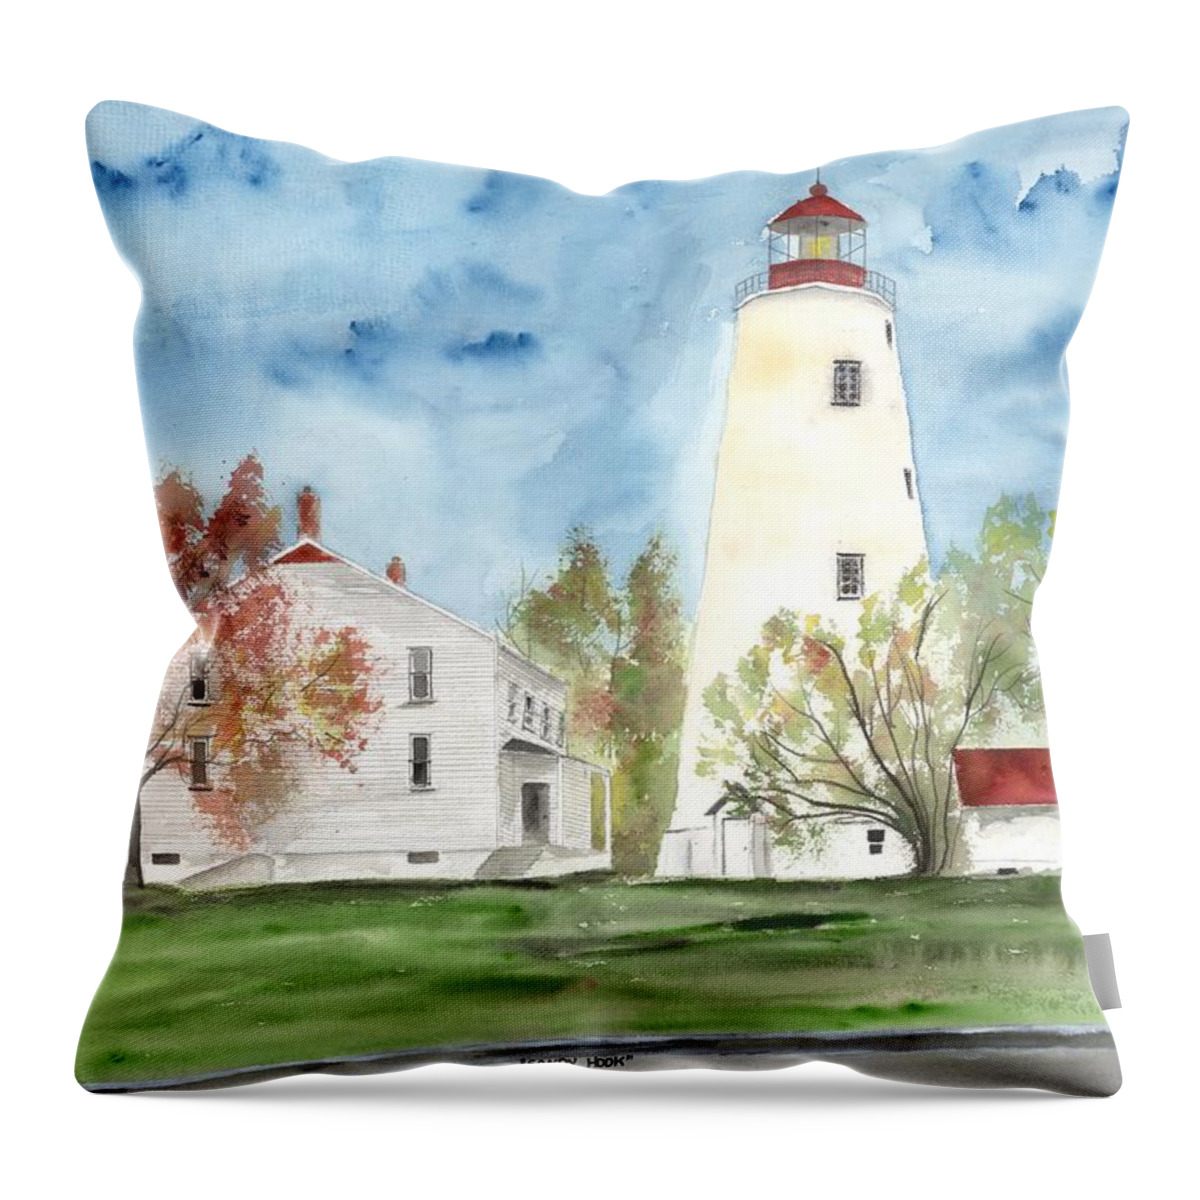 Watercolor Throw Pillow featuring the painting Sandy Hook Lighthouse by Derek Mccrea